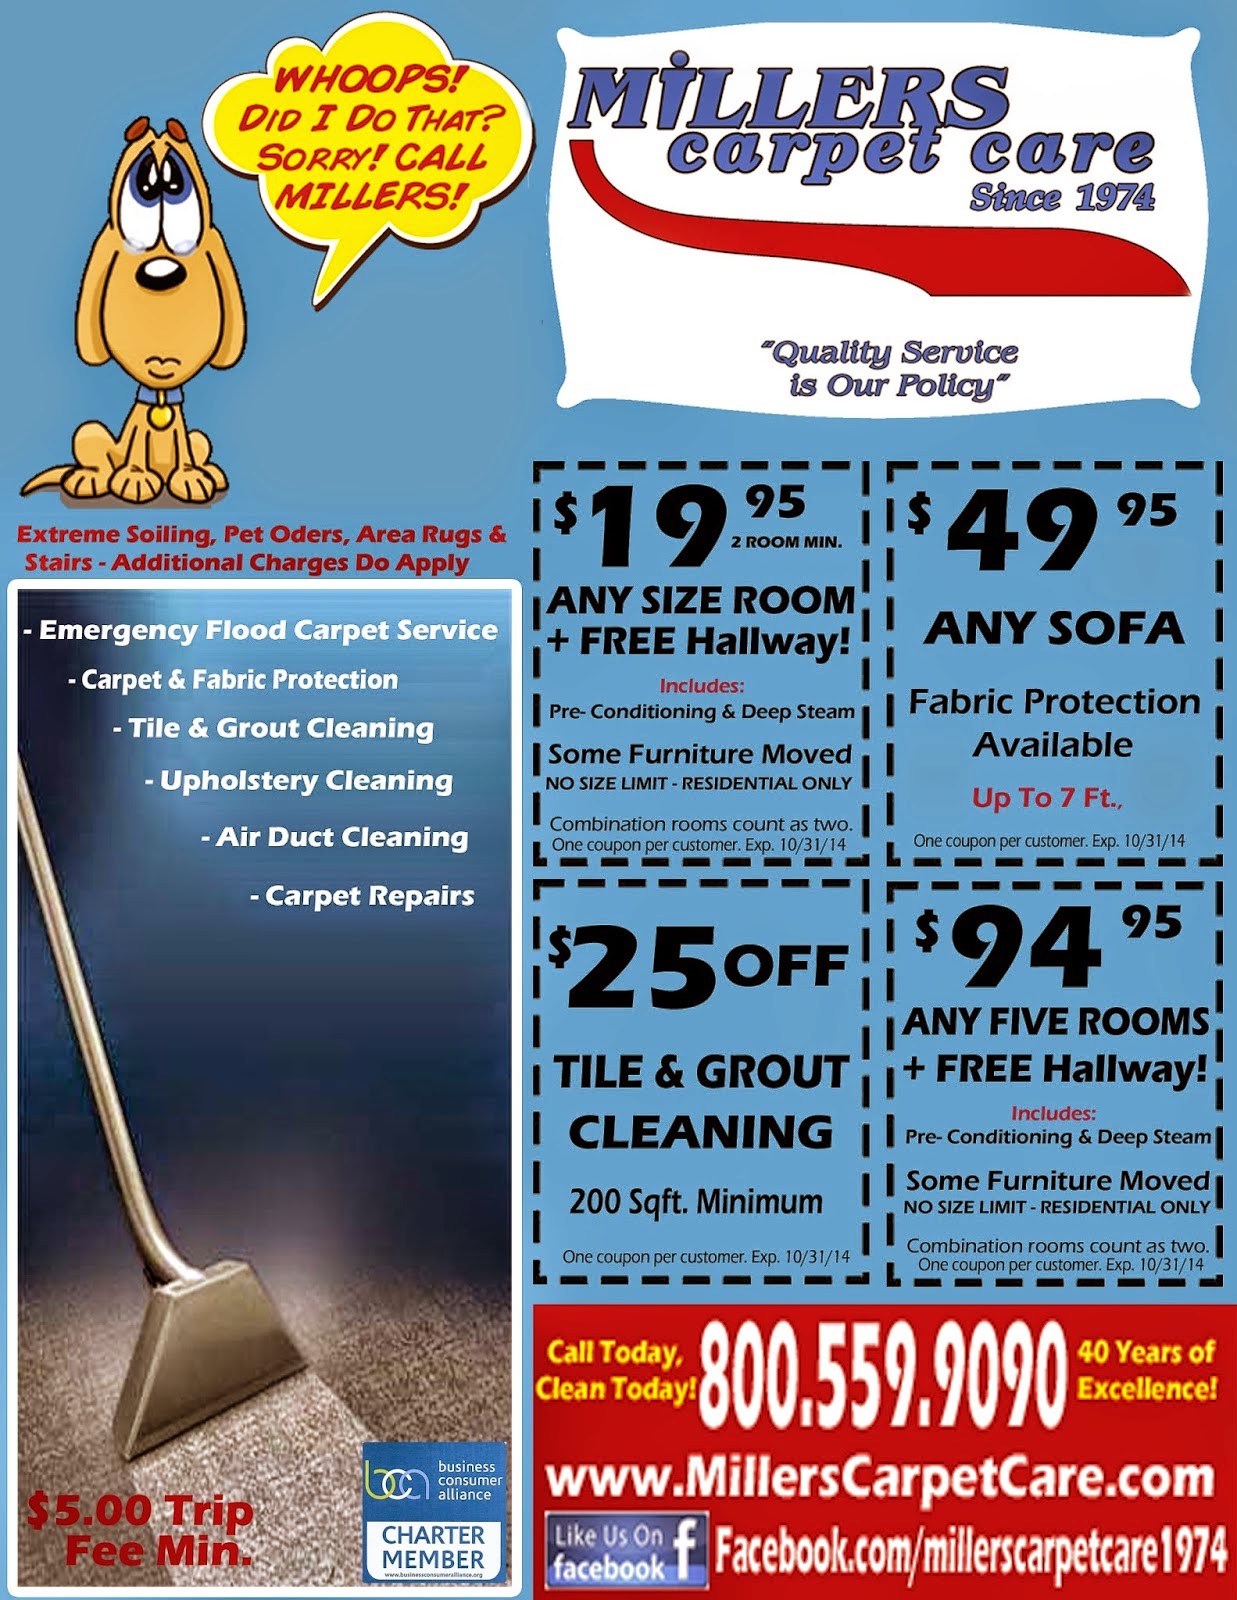 Get More Than Just Carpets Cleaned with Miller's Carpet Care